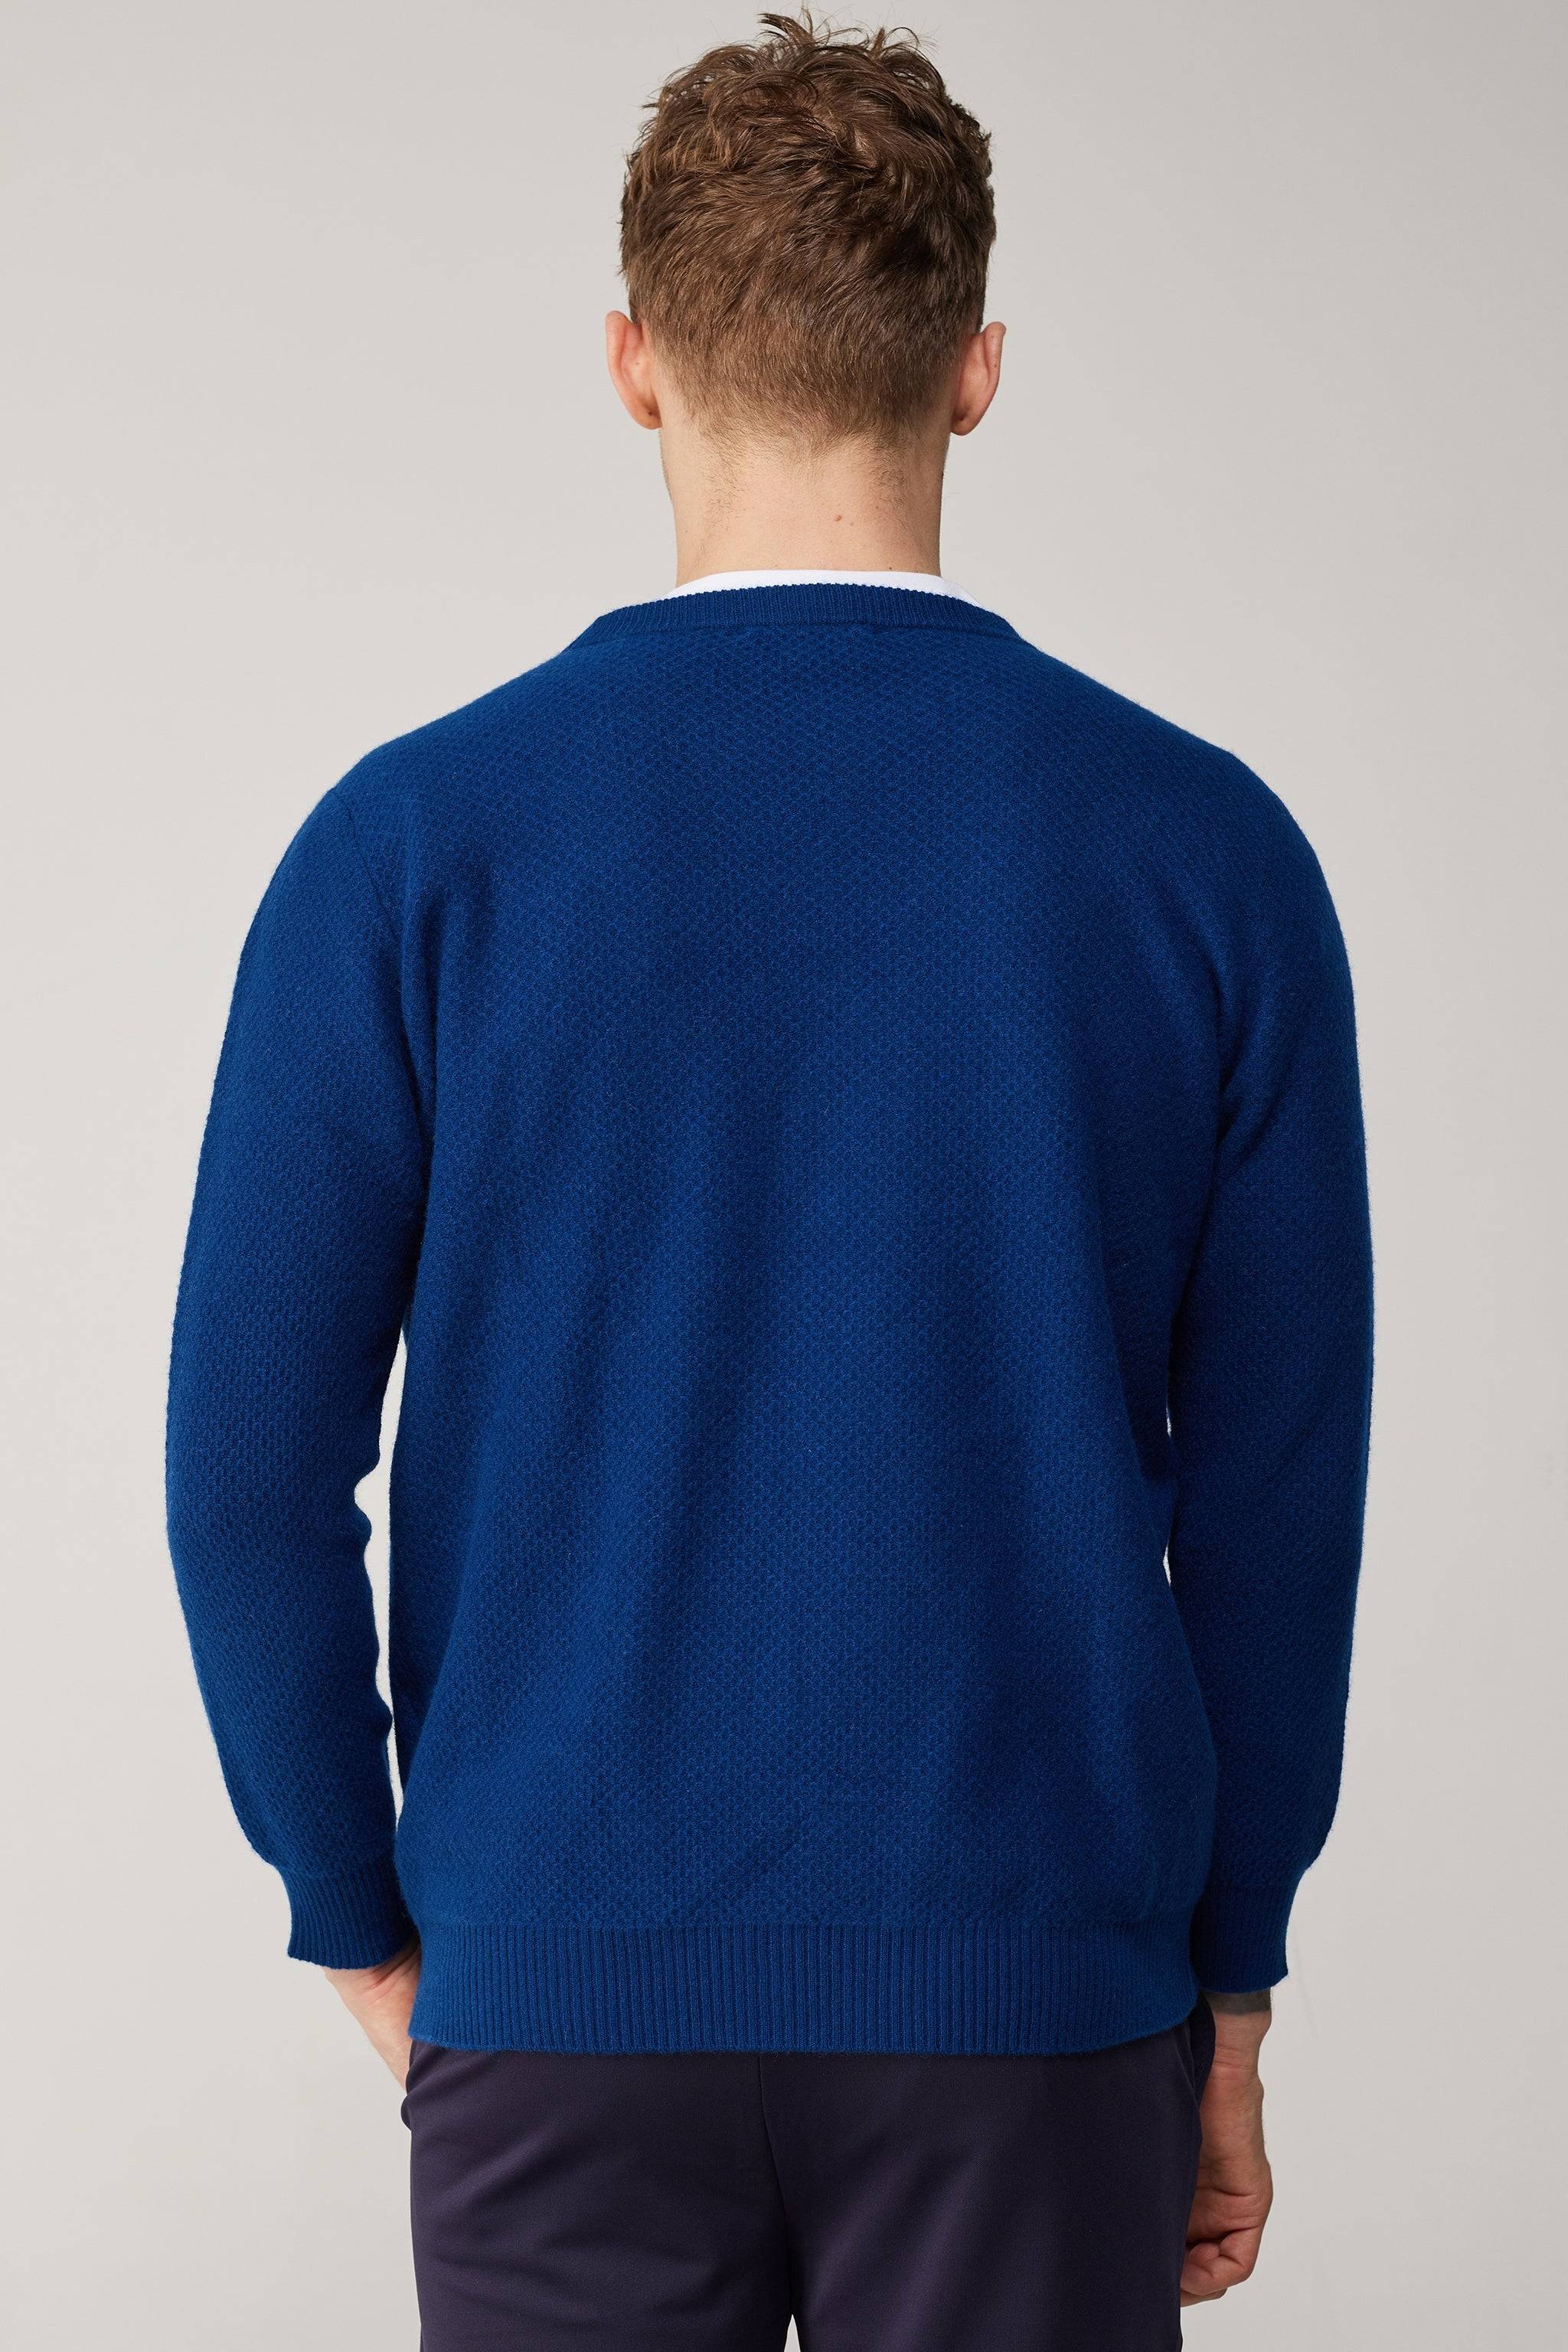 a man in a blue sweater is facing away from the camera